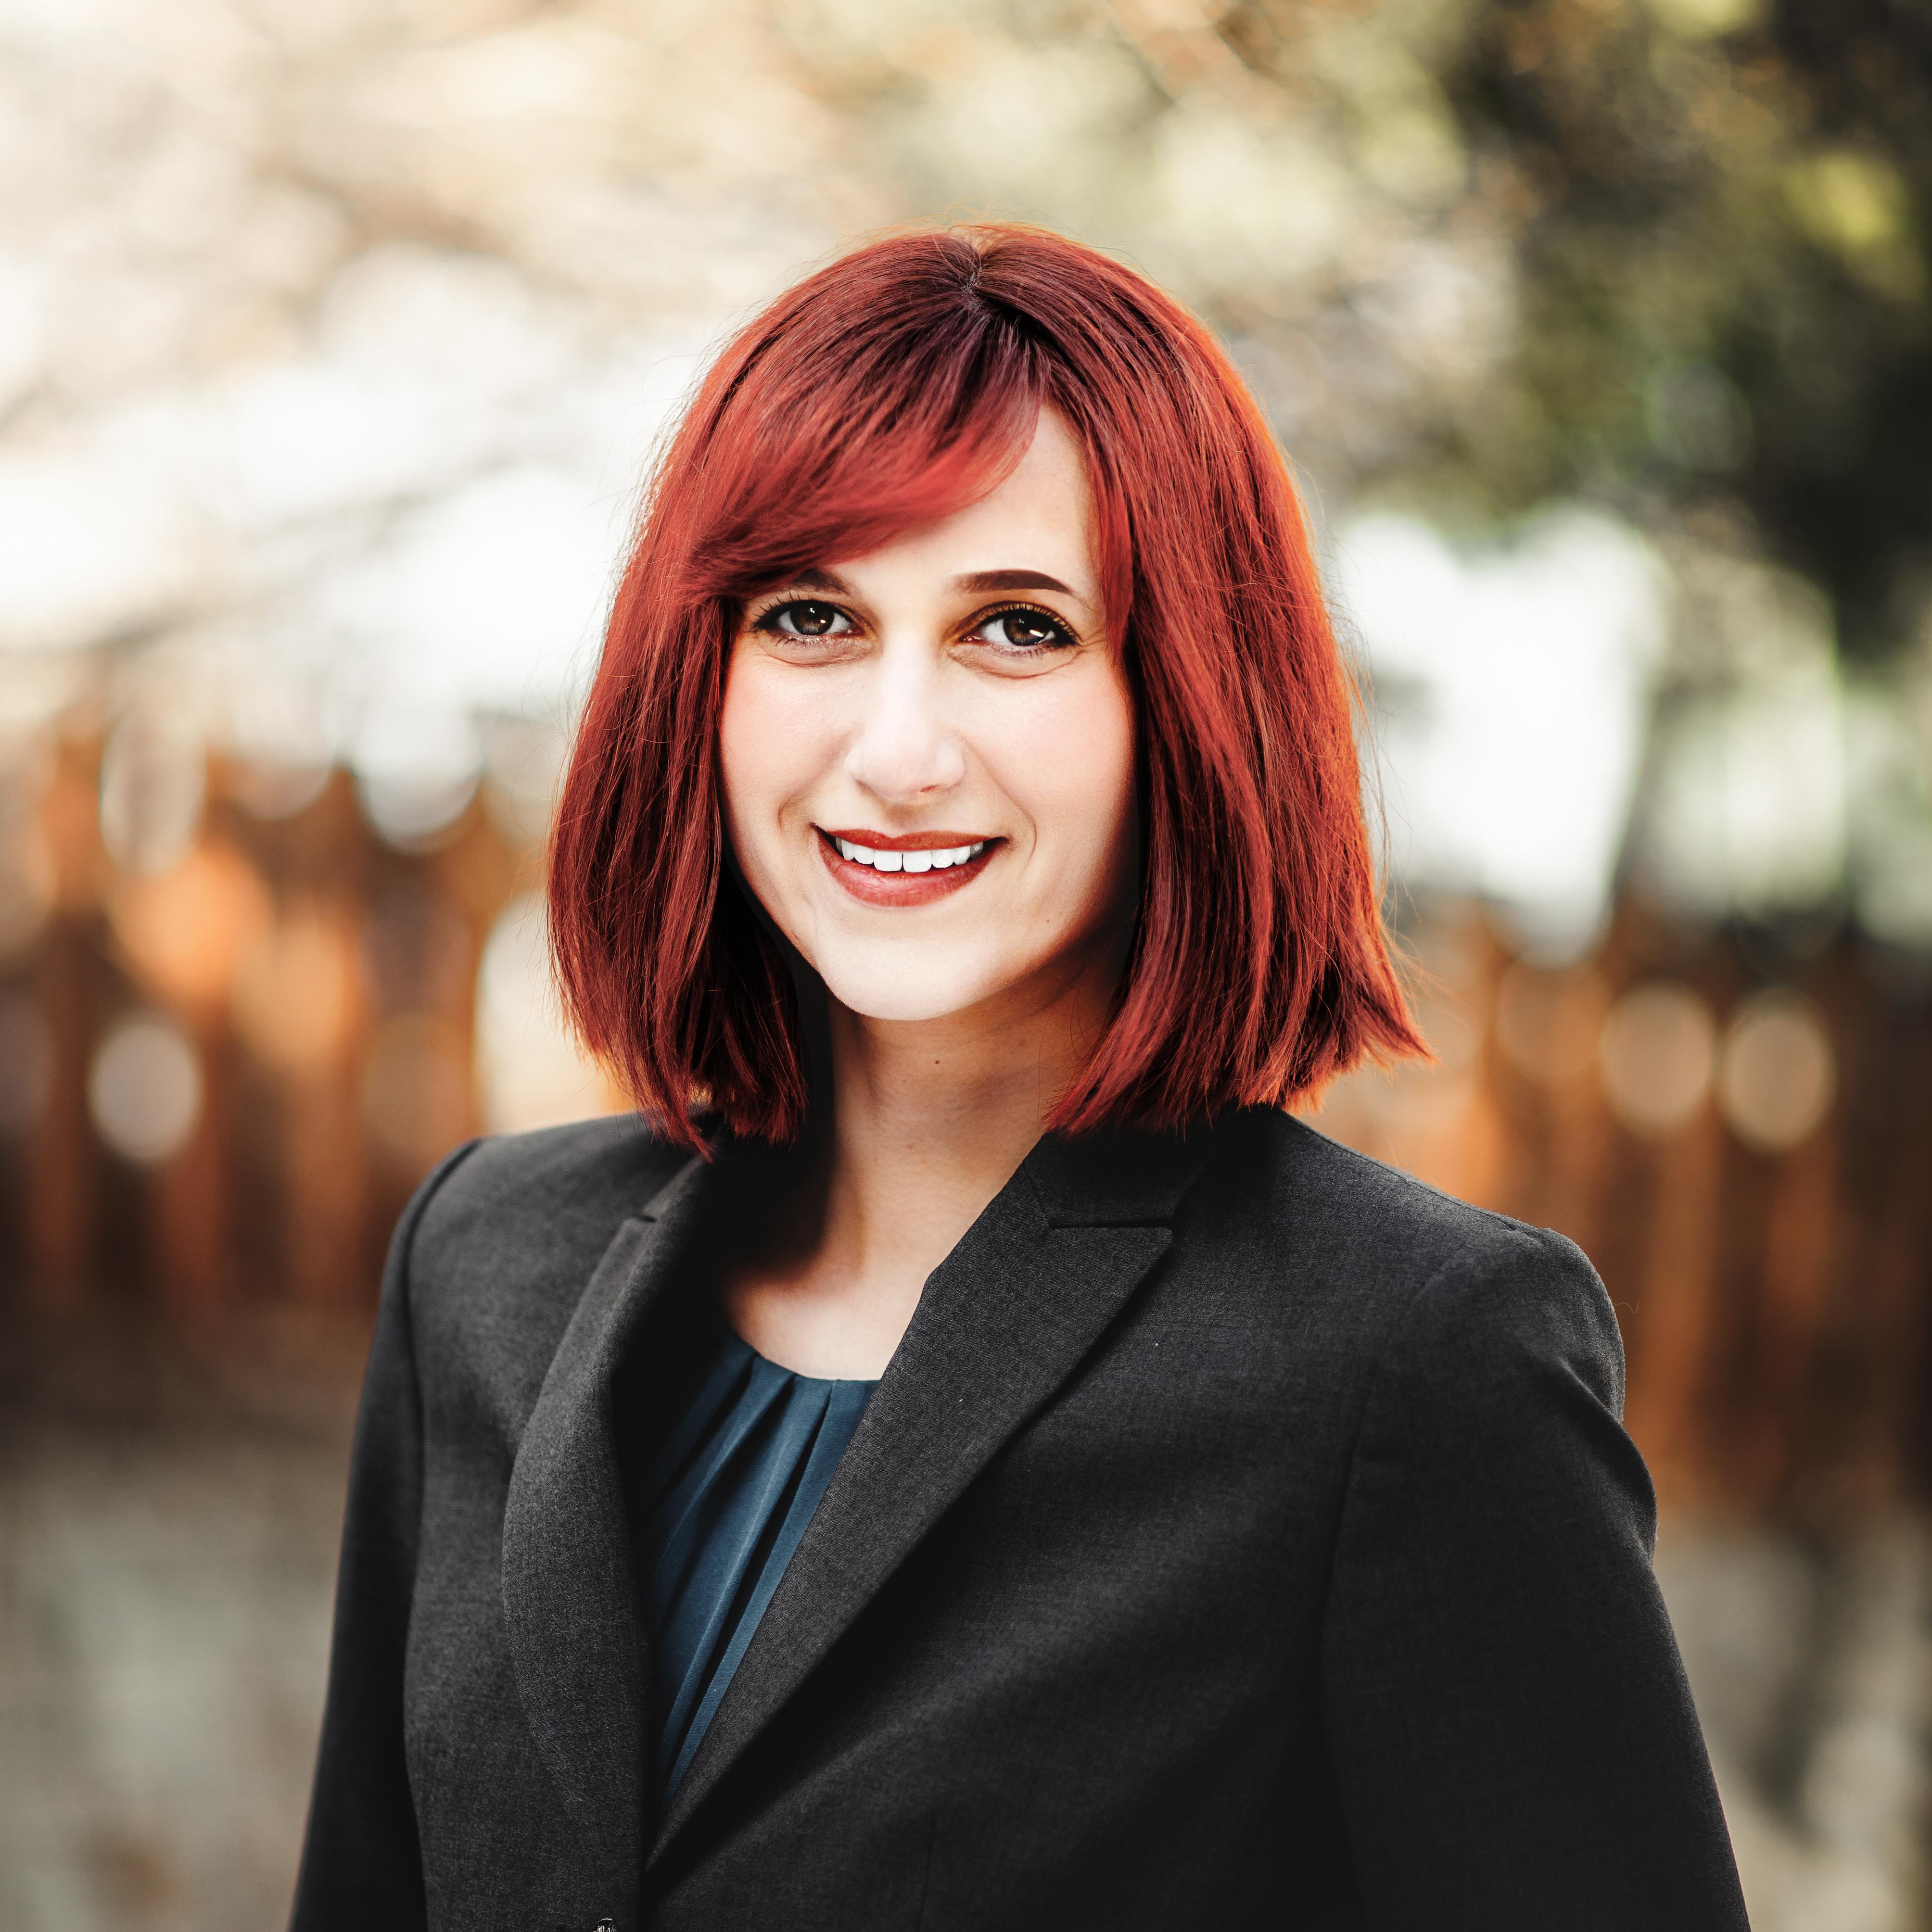 Image of Arielle Brachfeld. She has a black suit, red hair, and is smiling. The background image is blurred of an outdoor setting with a brown fence. 